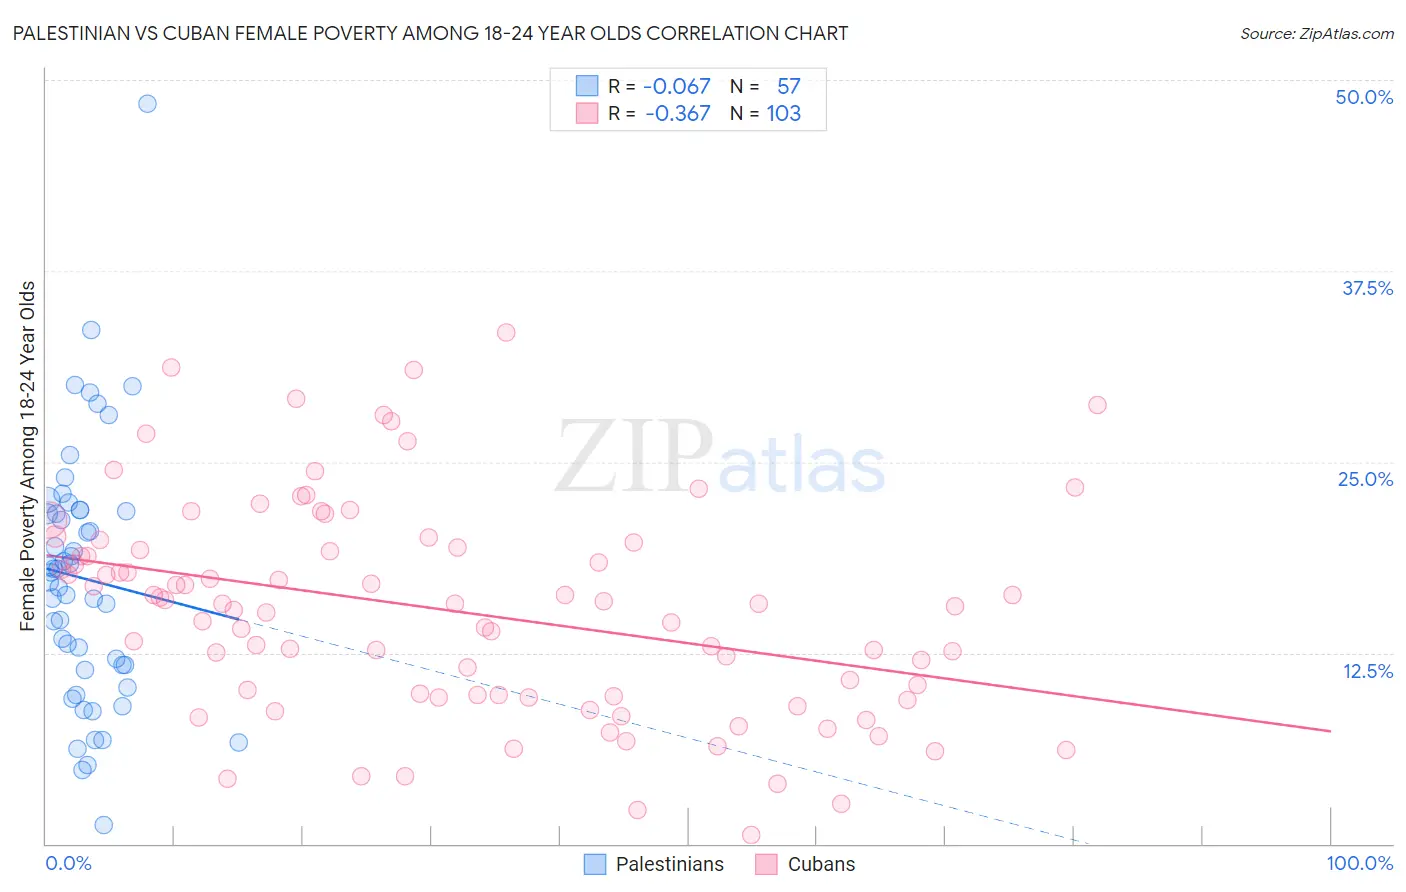 Palestinian vs Cuban Female Poverty Among 18-24 Year Olds